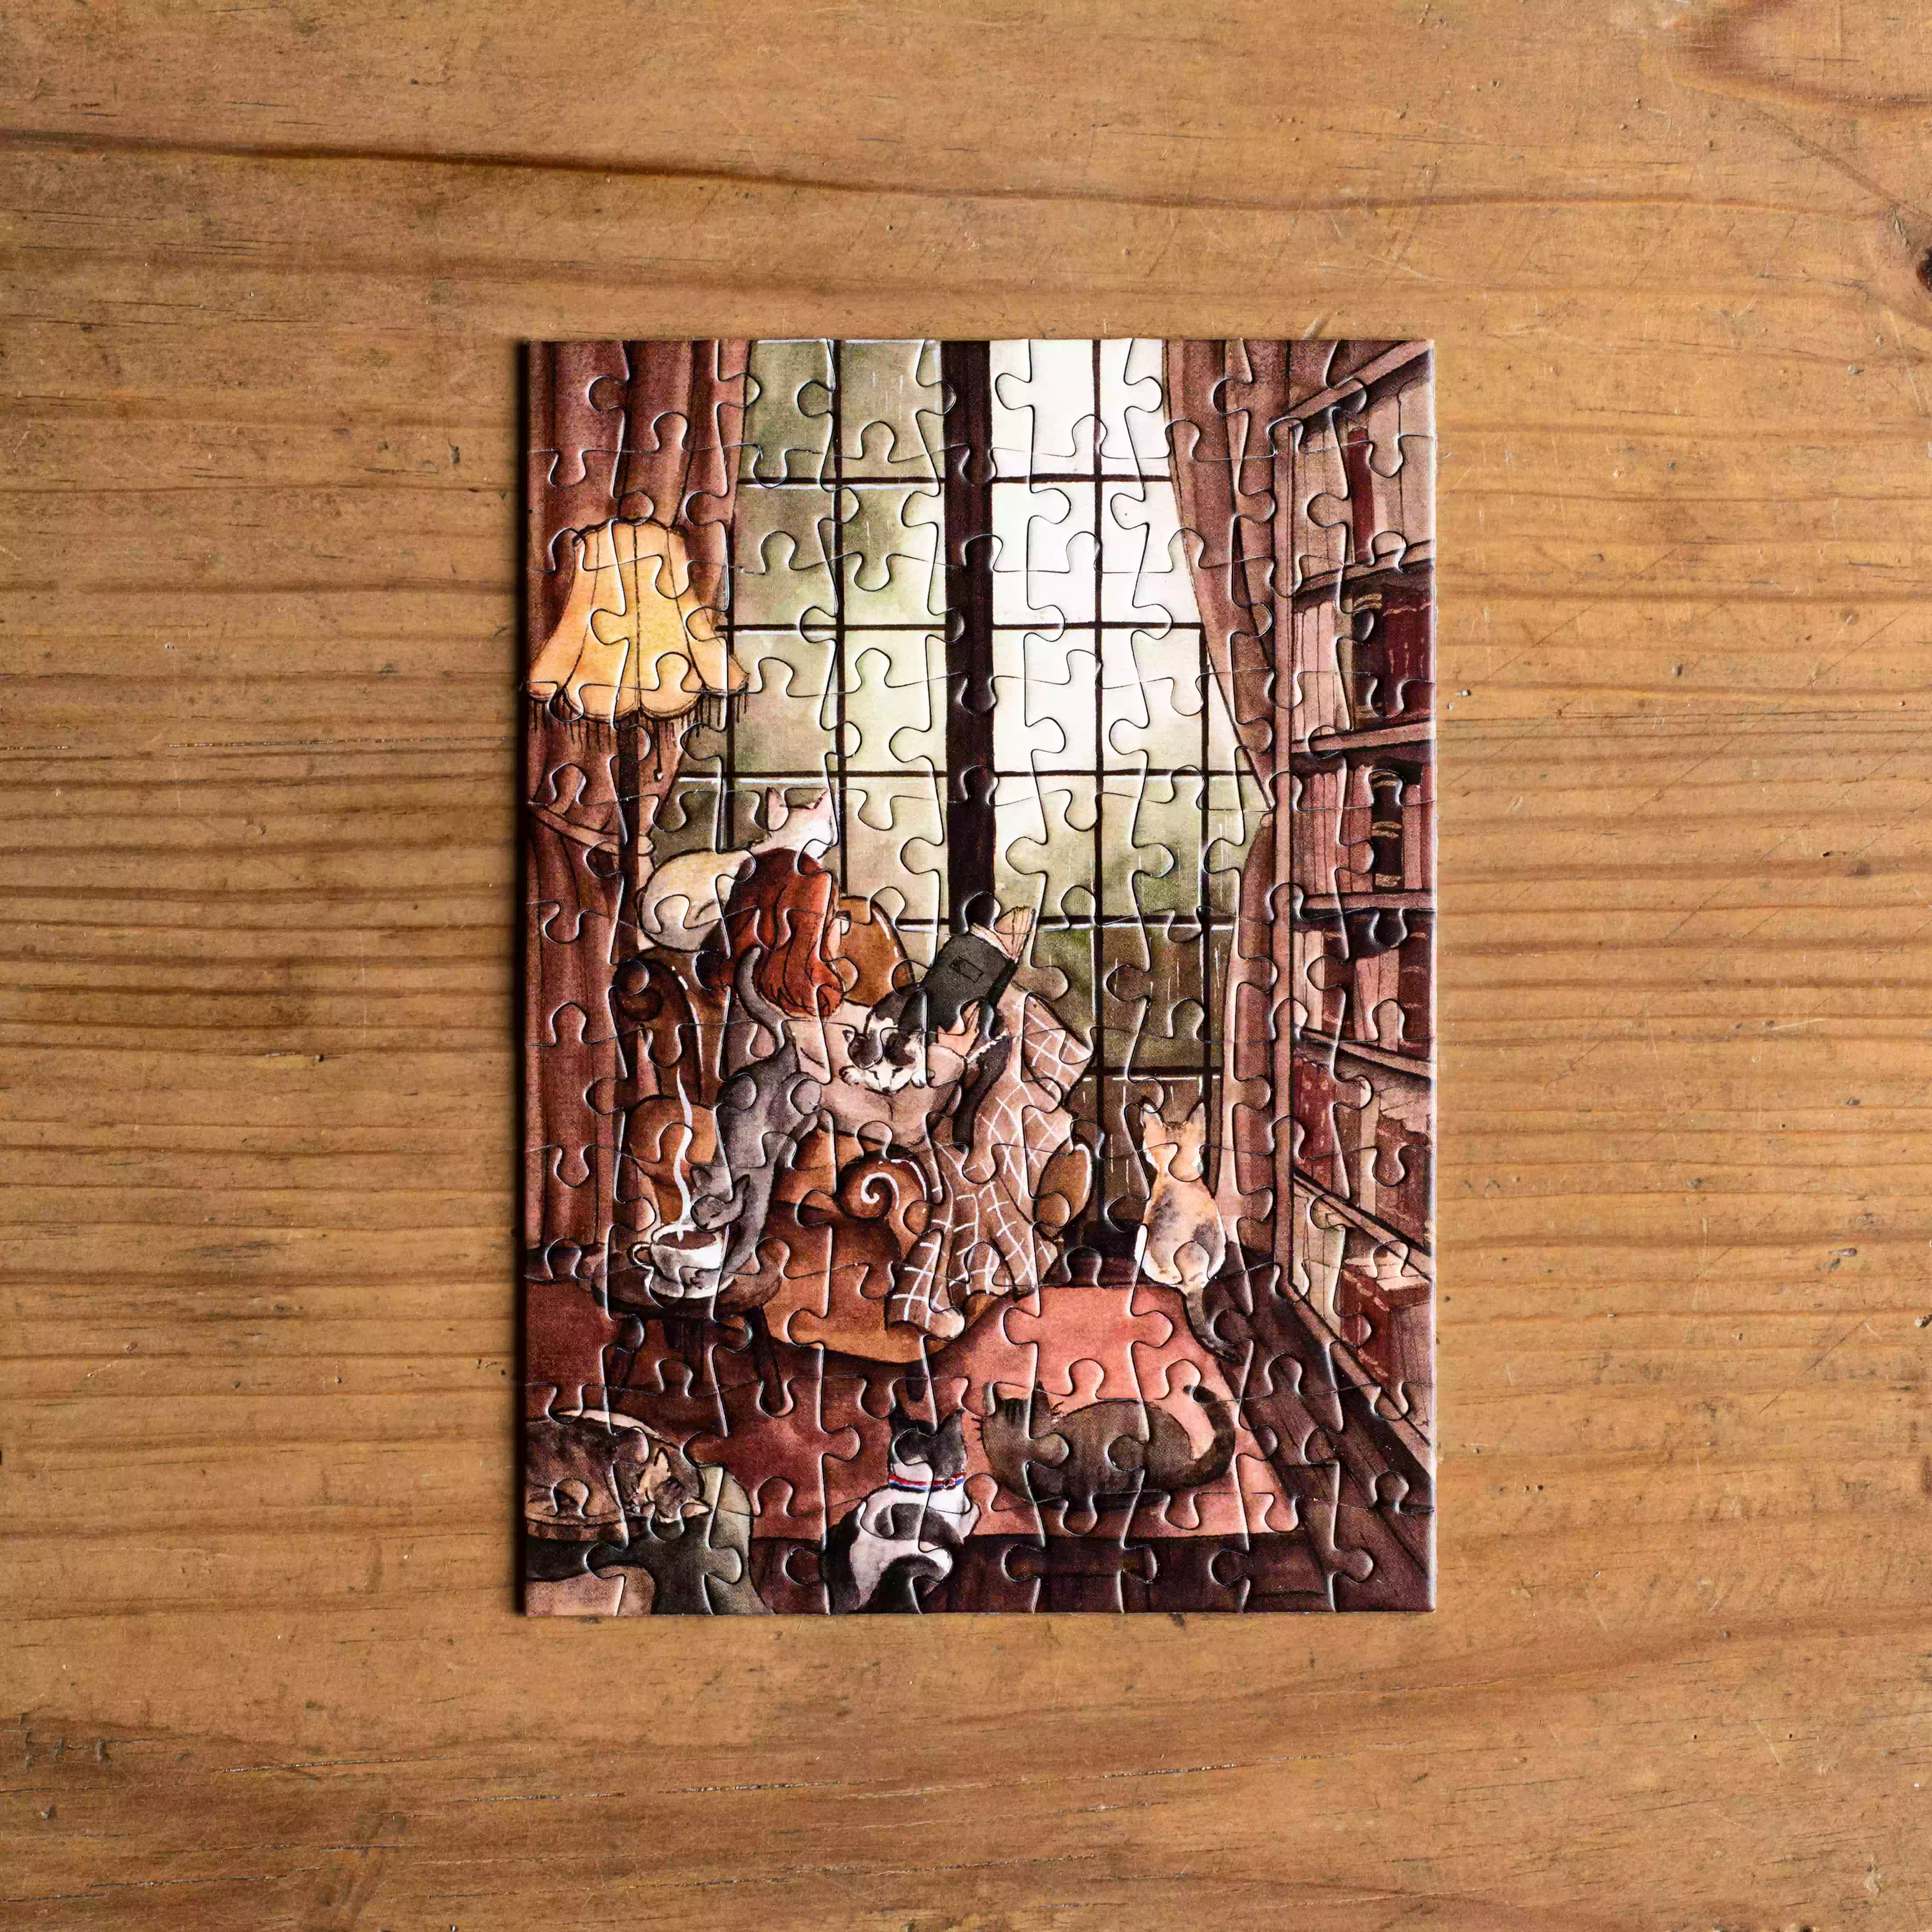 cats and books mini puzzle trevell 99 pièces